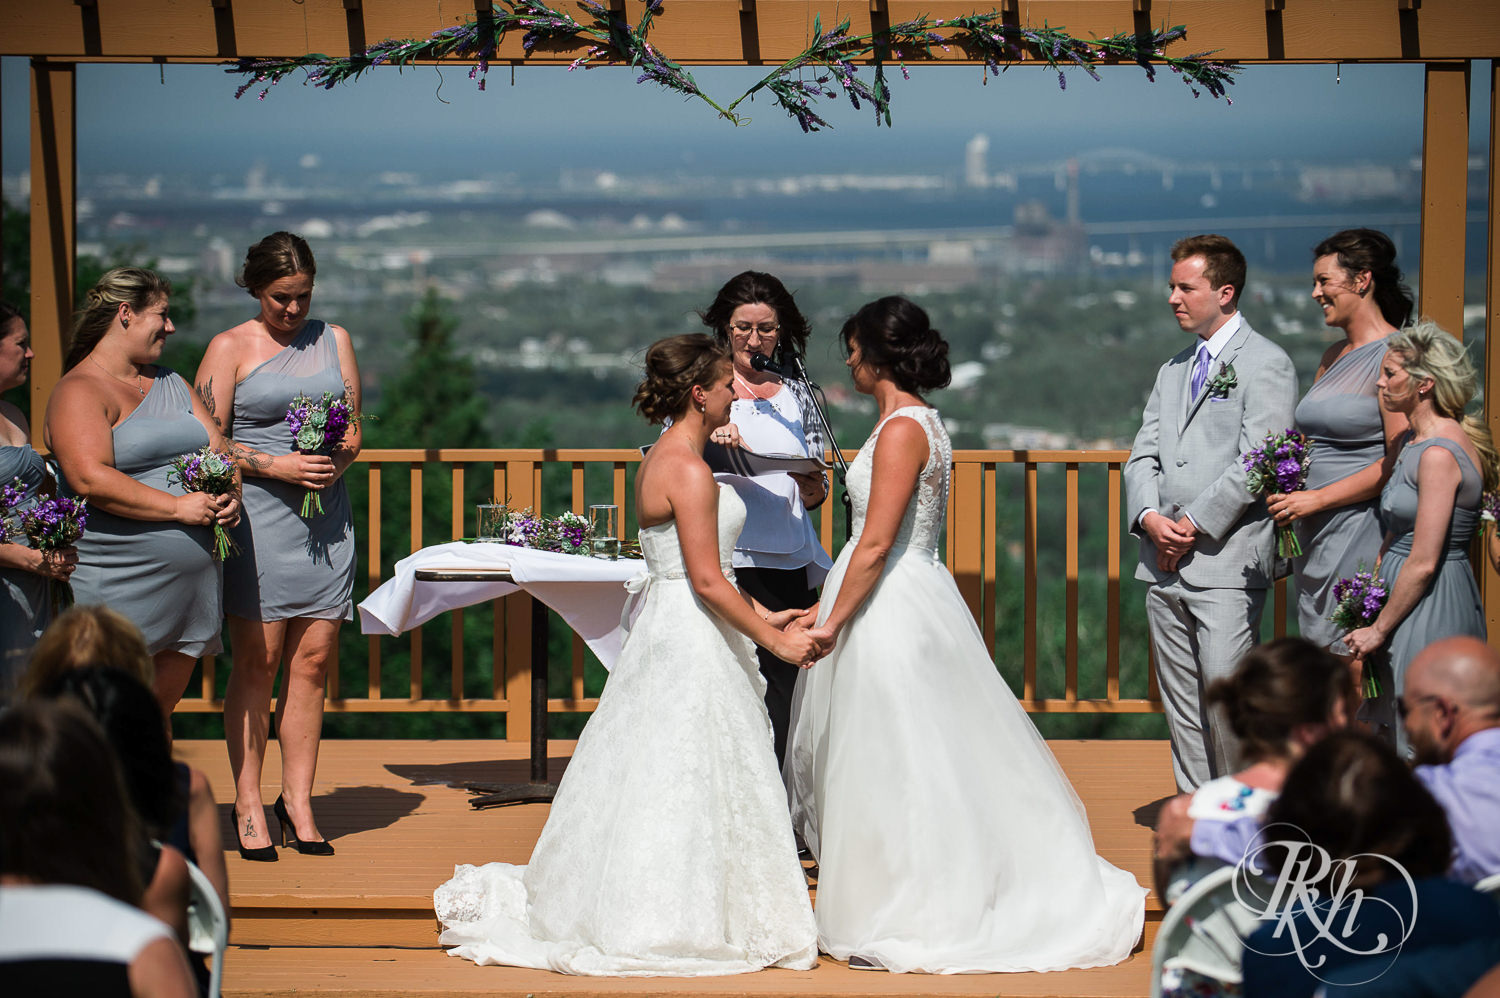 Lesbian brides hold hands during outdoor ceremony at Spirit Mountain in Duluth, Minnesota.